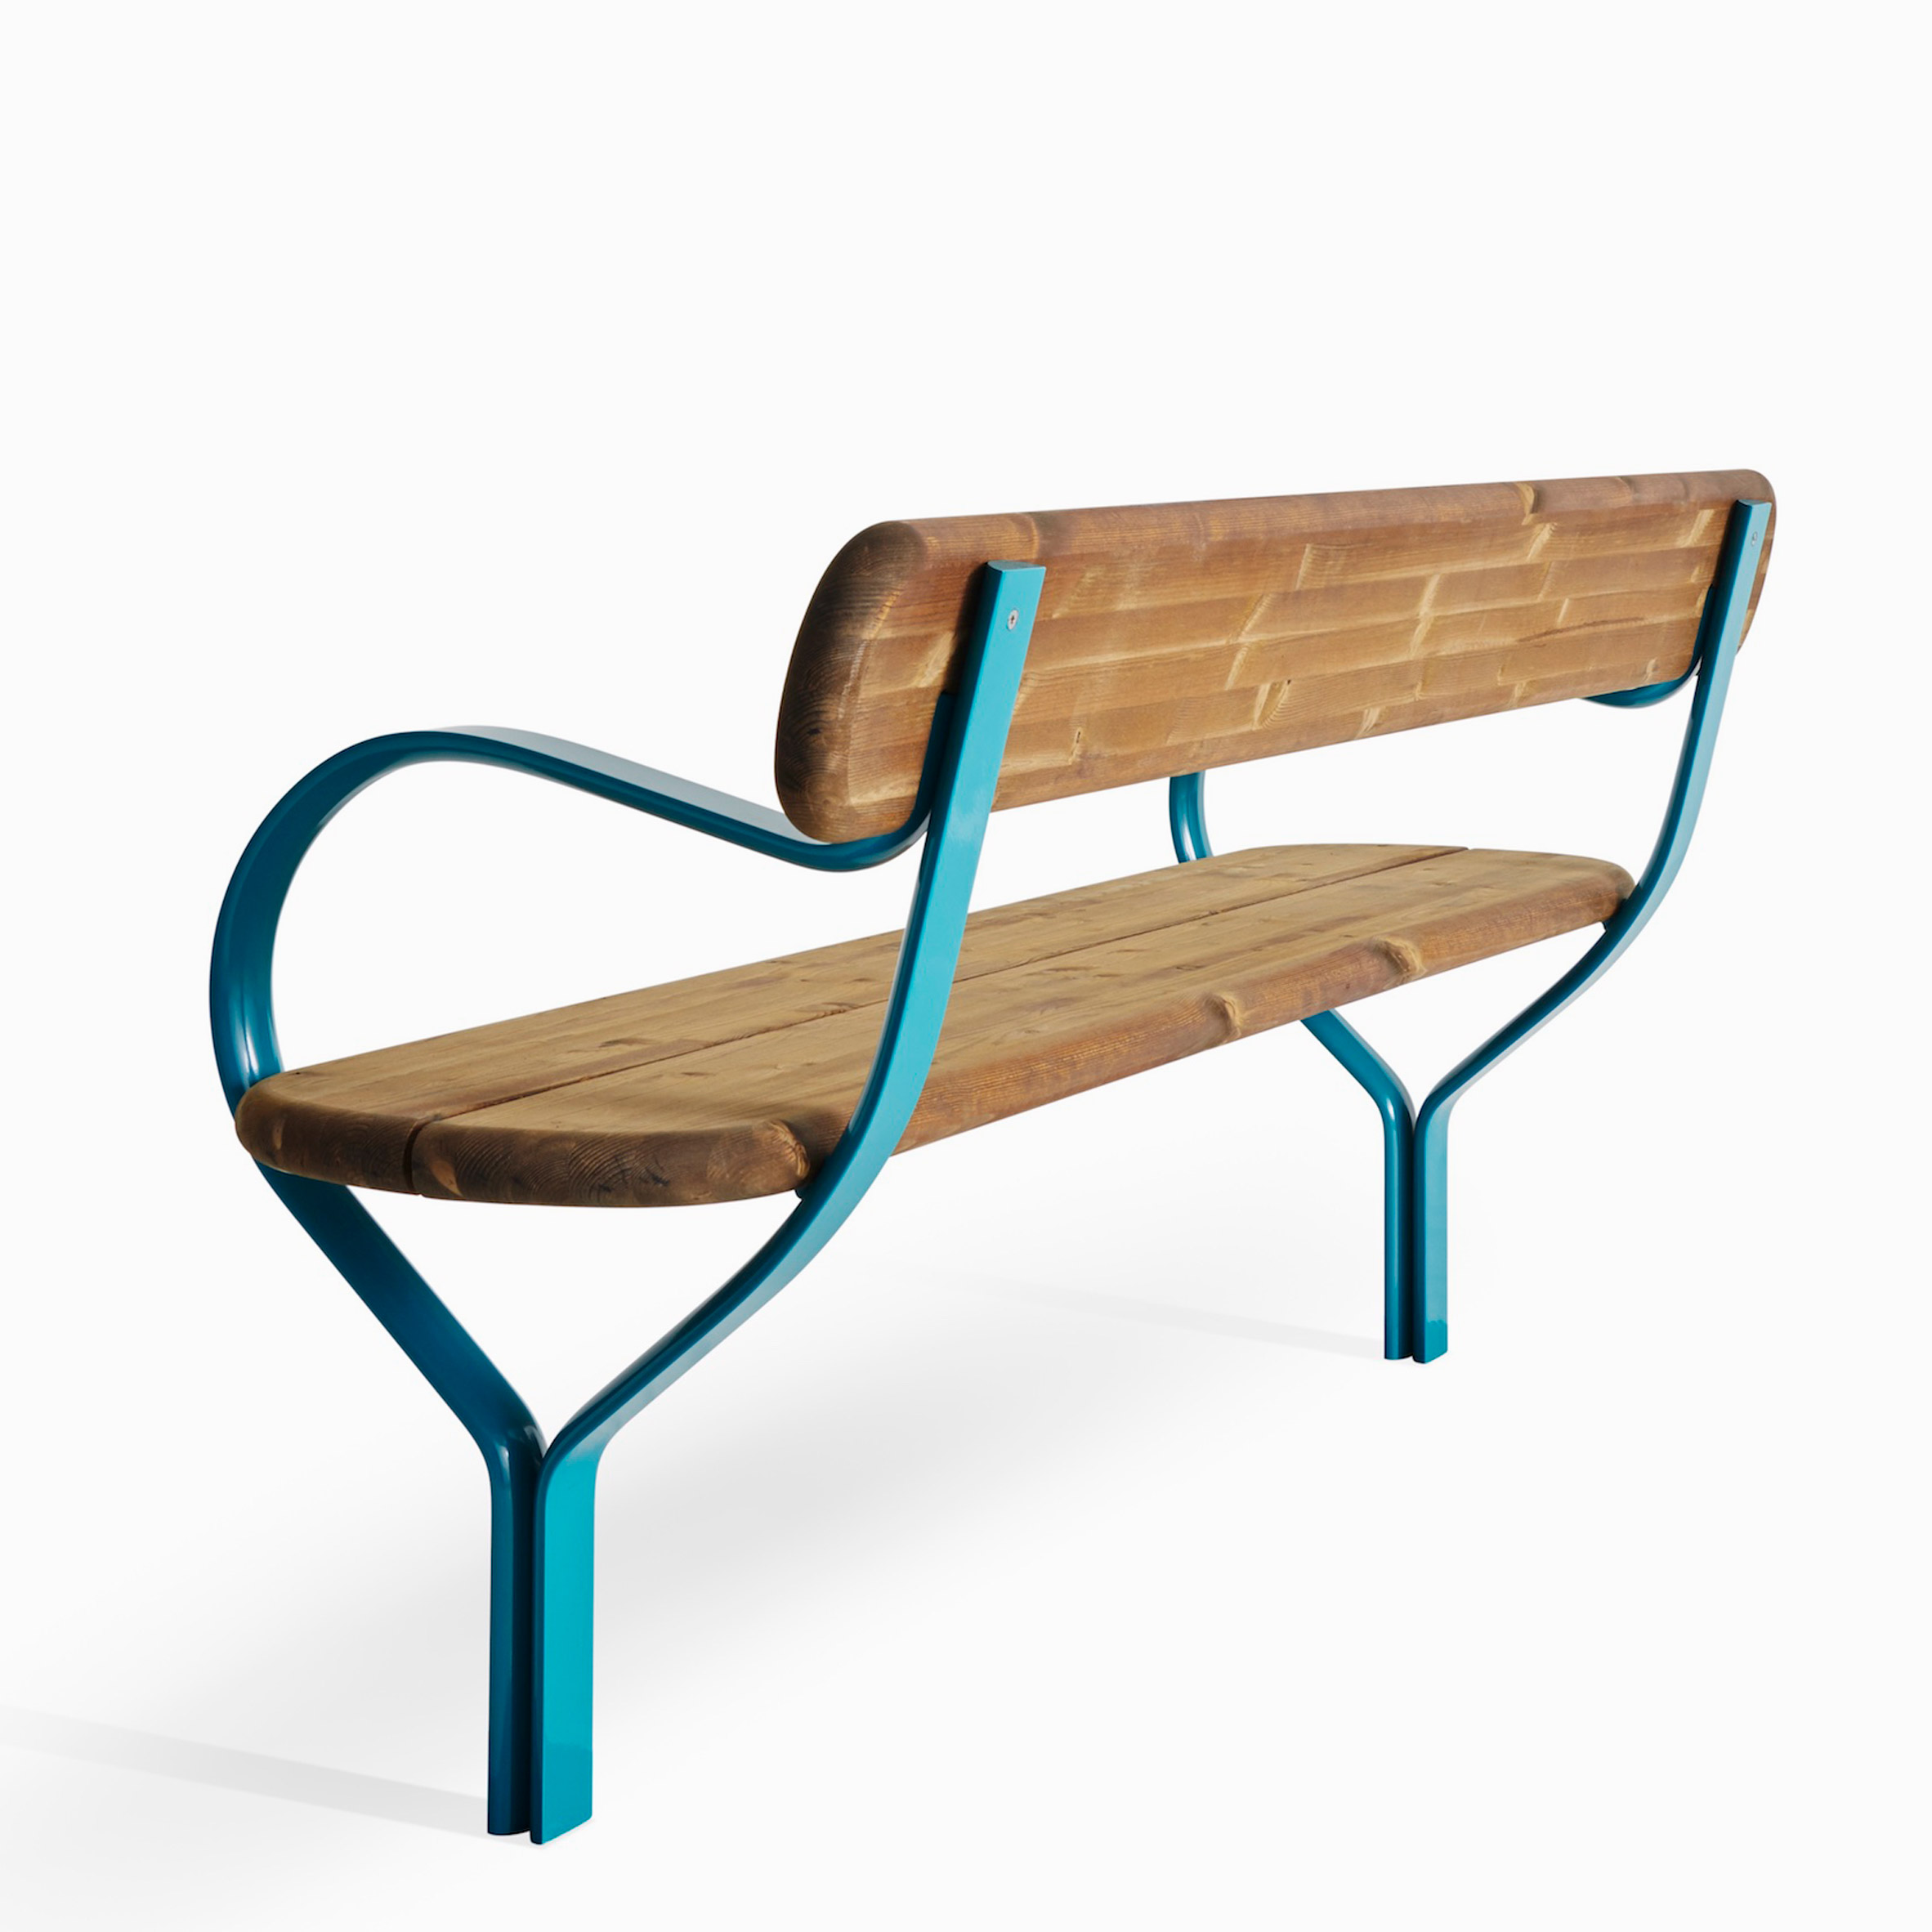 Bench in the Folk outdoor furniture collection by Vestre and Front